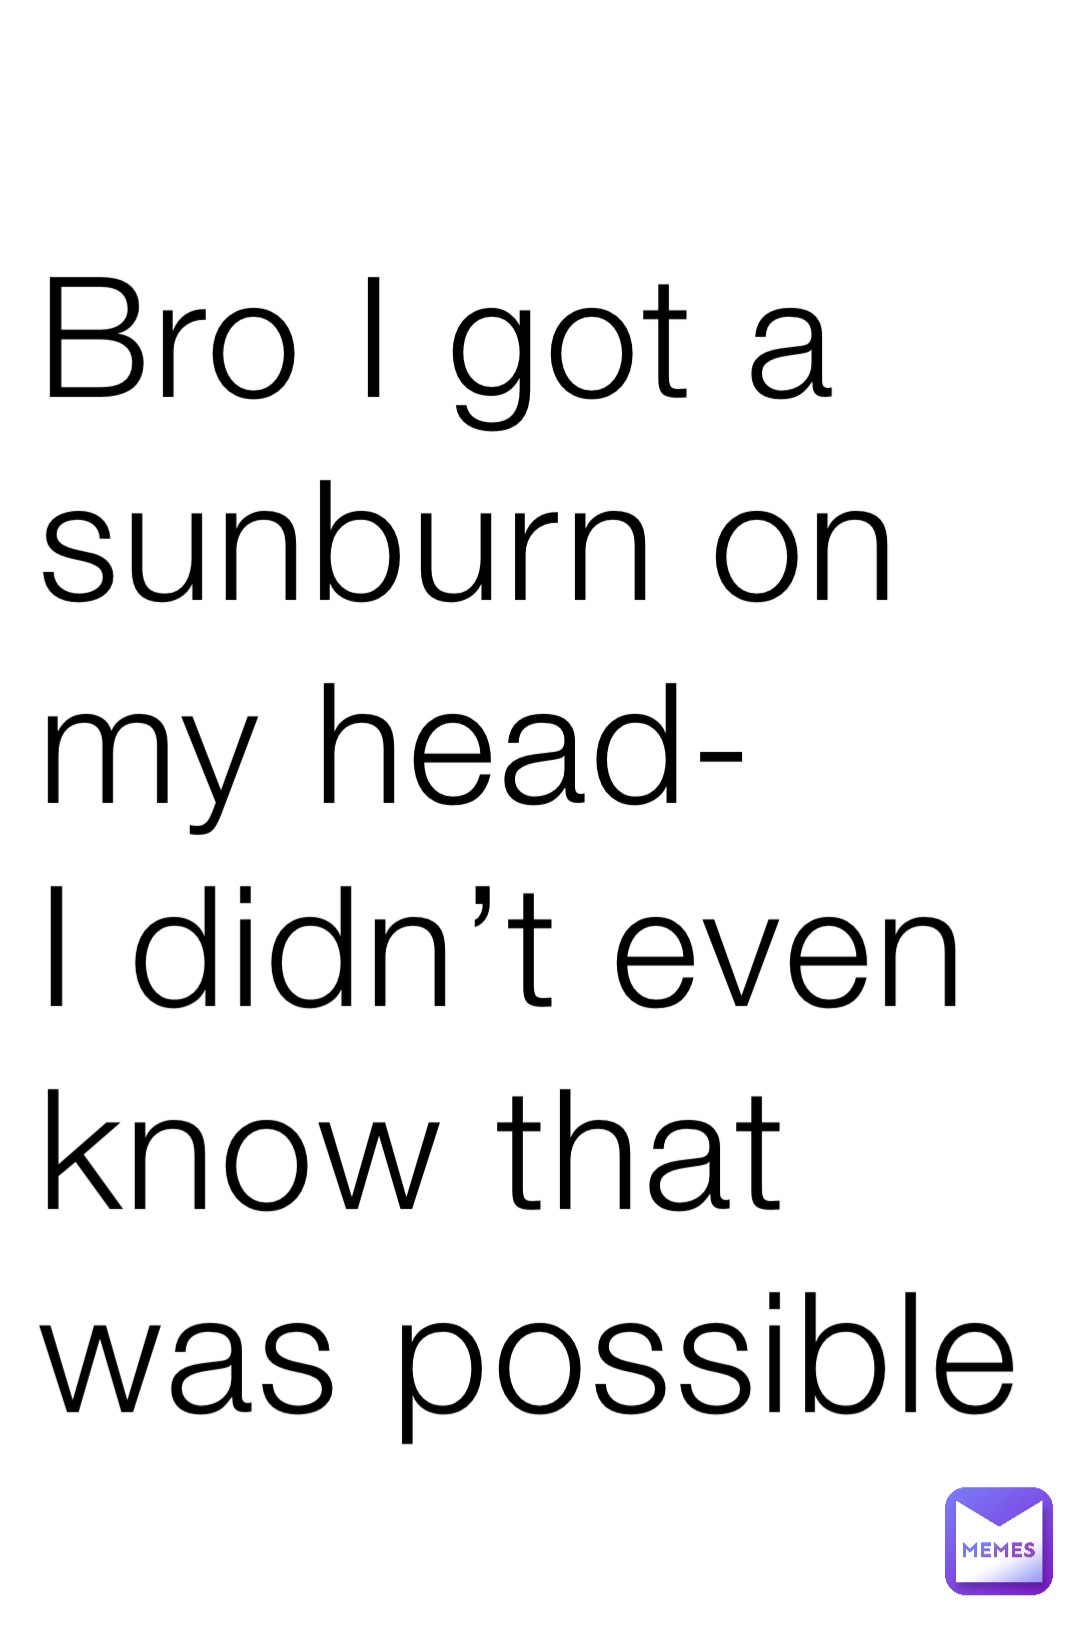 Bro I got a sunburn on my head-
I didn’t even know that was possible